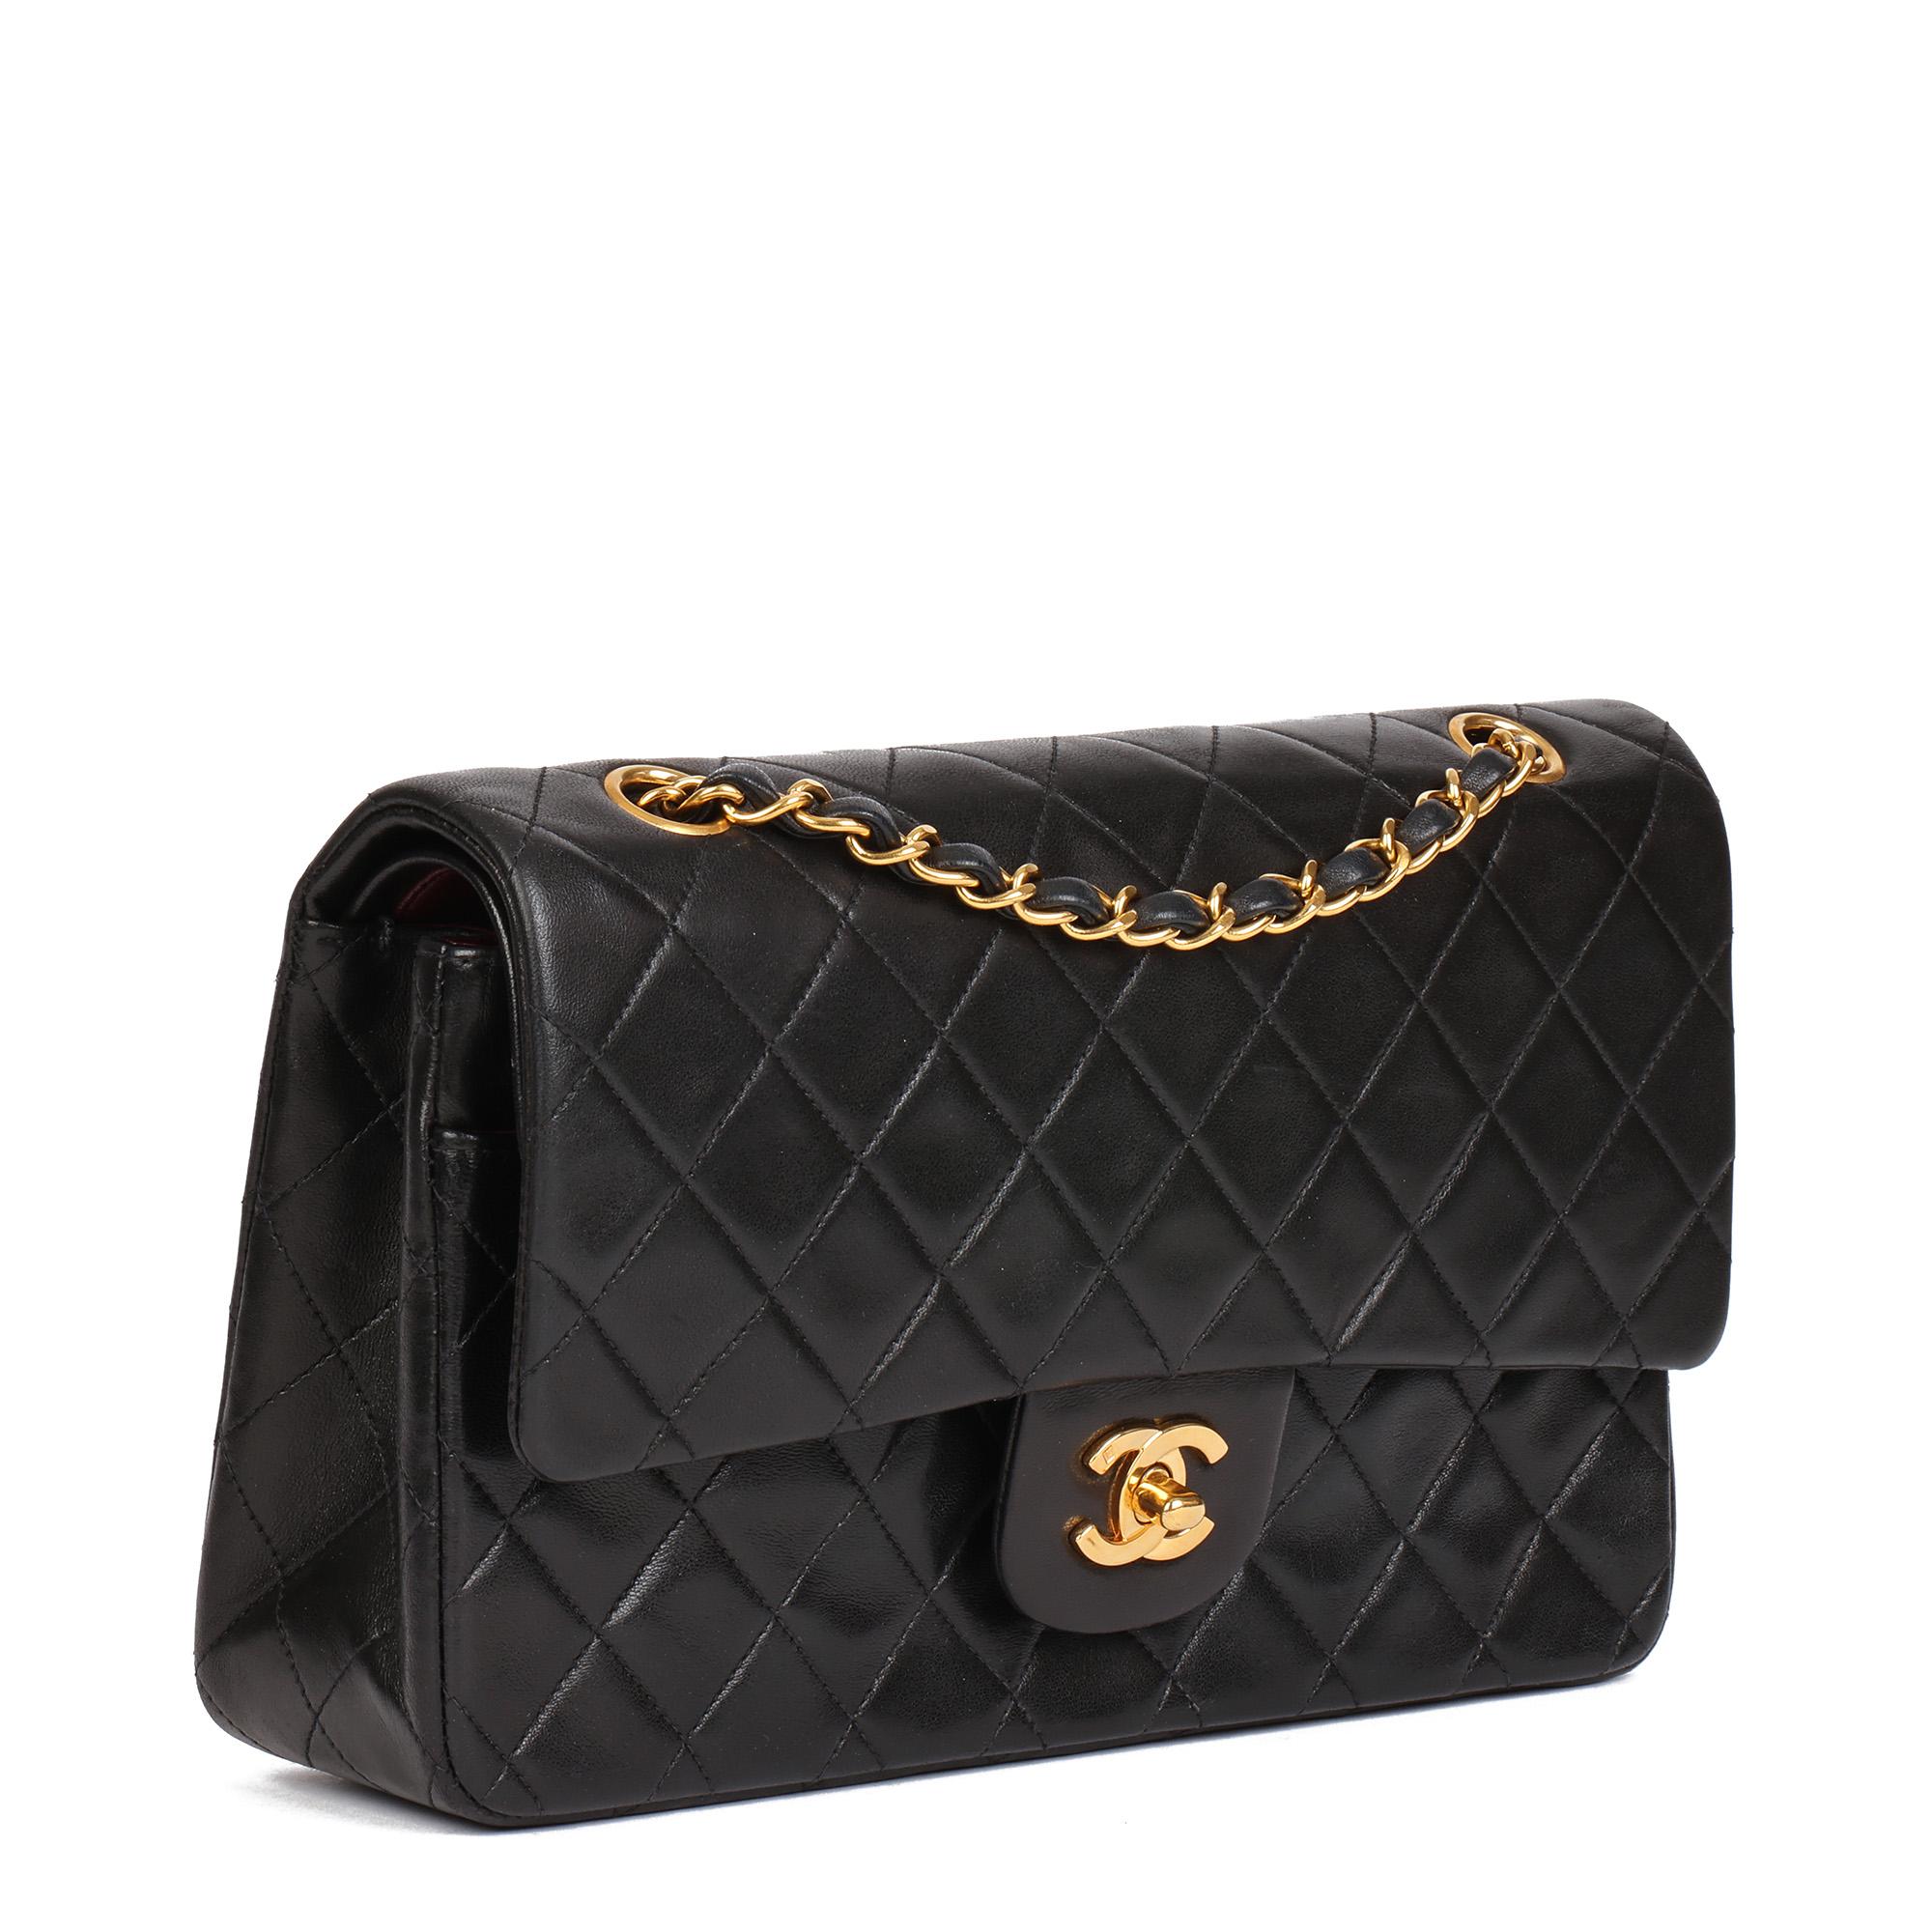 CHANEL
Black Quilted Lambskin Vintage Medium Classic Double Flap Bag 

Serial Number: 4007456
Age (Circa): 1996
Accompanied By: Chanel Dust Bag, Authenticity Card
Authenticity Details: Authenticity Card, Serial Sticker (Made in France)
Gender: